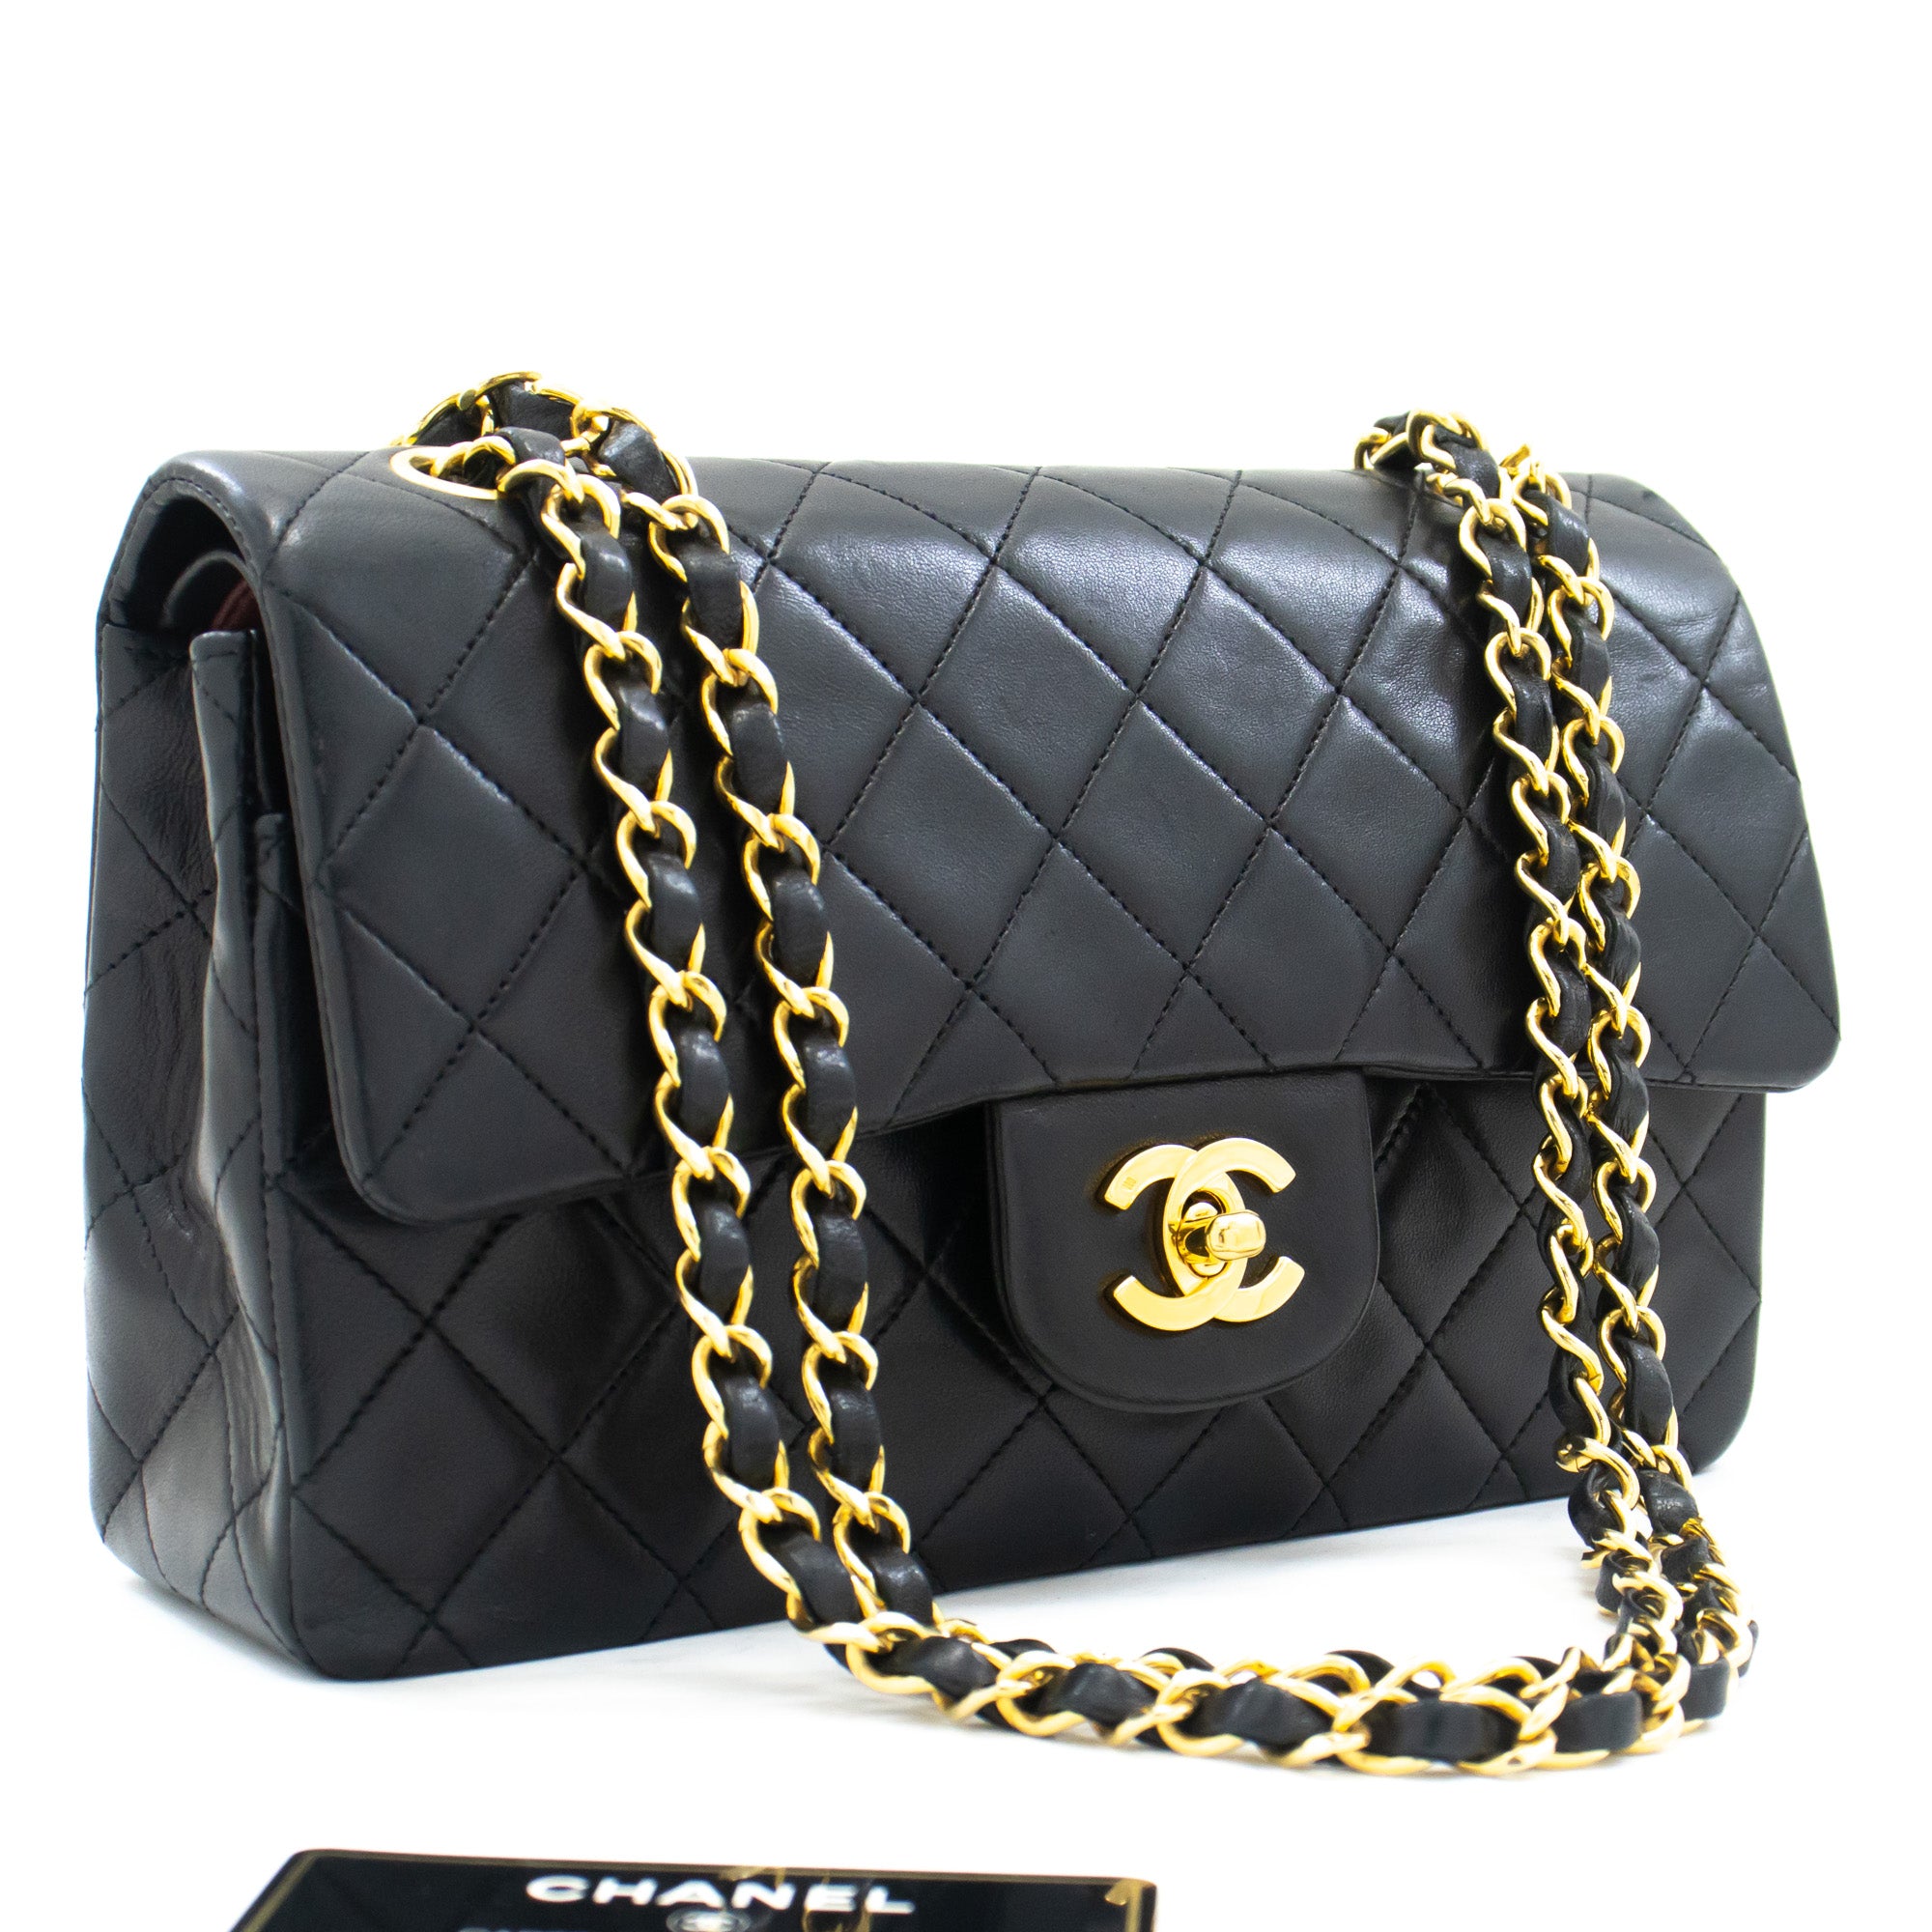 CHANEL Vintage 90s Black Lambskin Leather Classic Flap Quilted Mini  Shoulder Bag